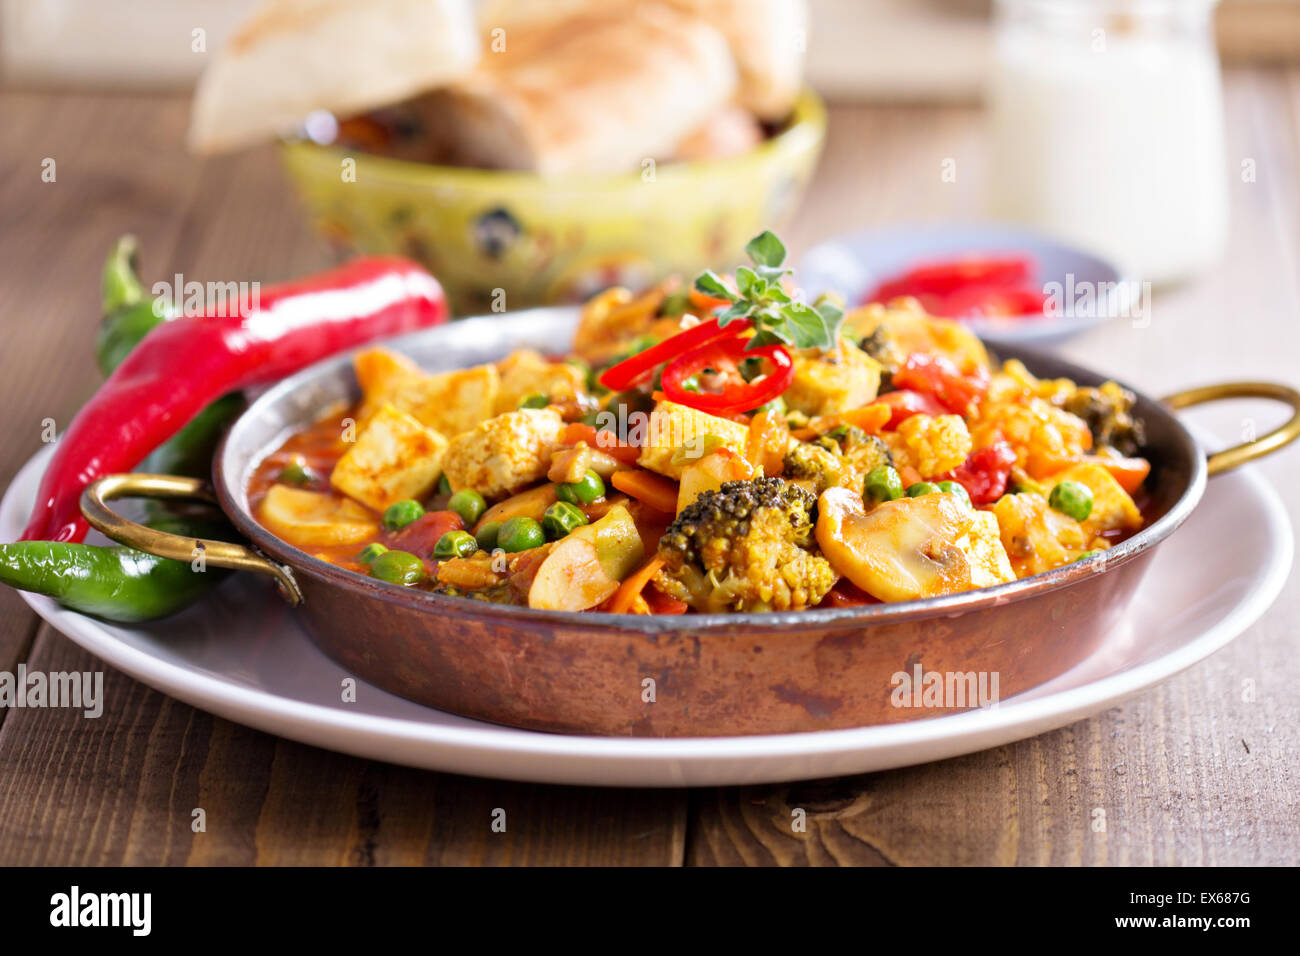 Vegan curry with tofu, mushrooms and vegetables Stock Photo